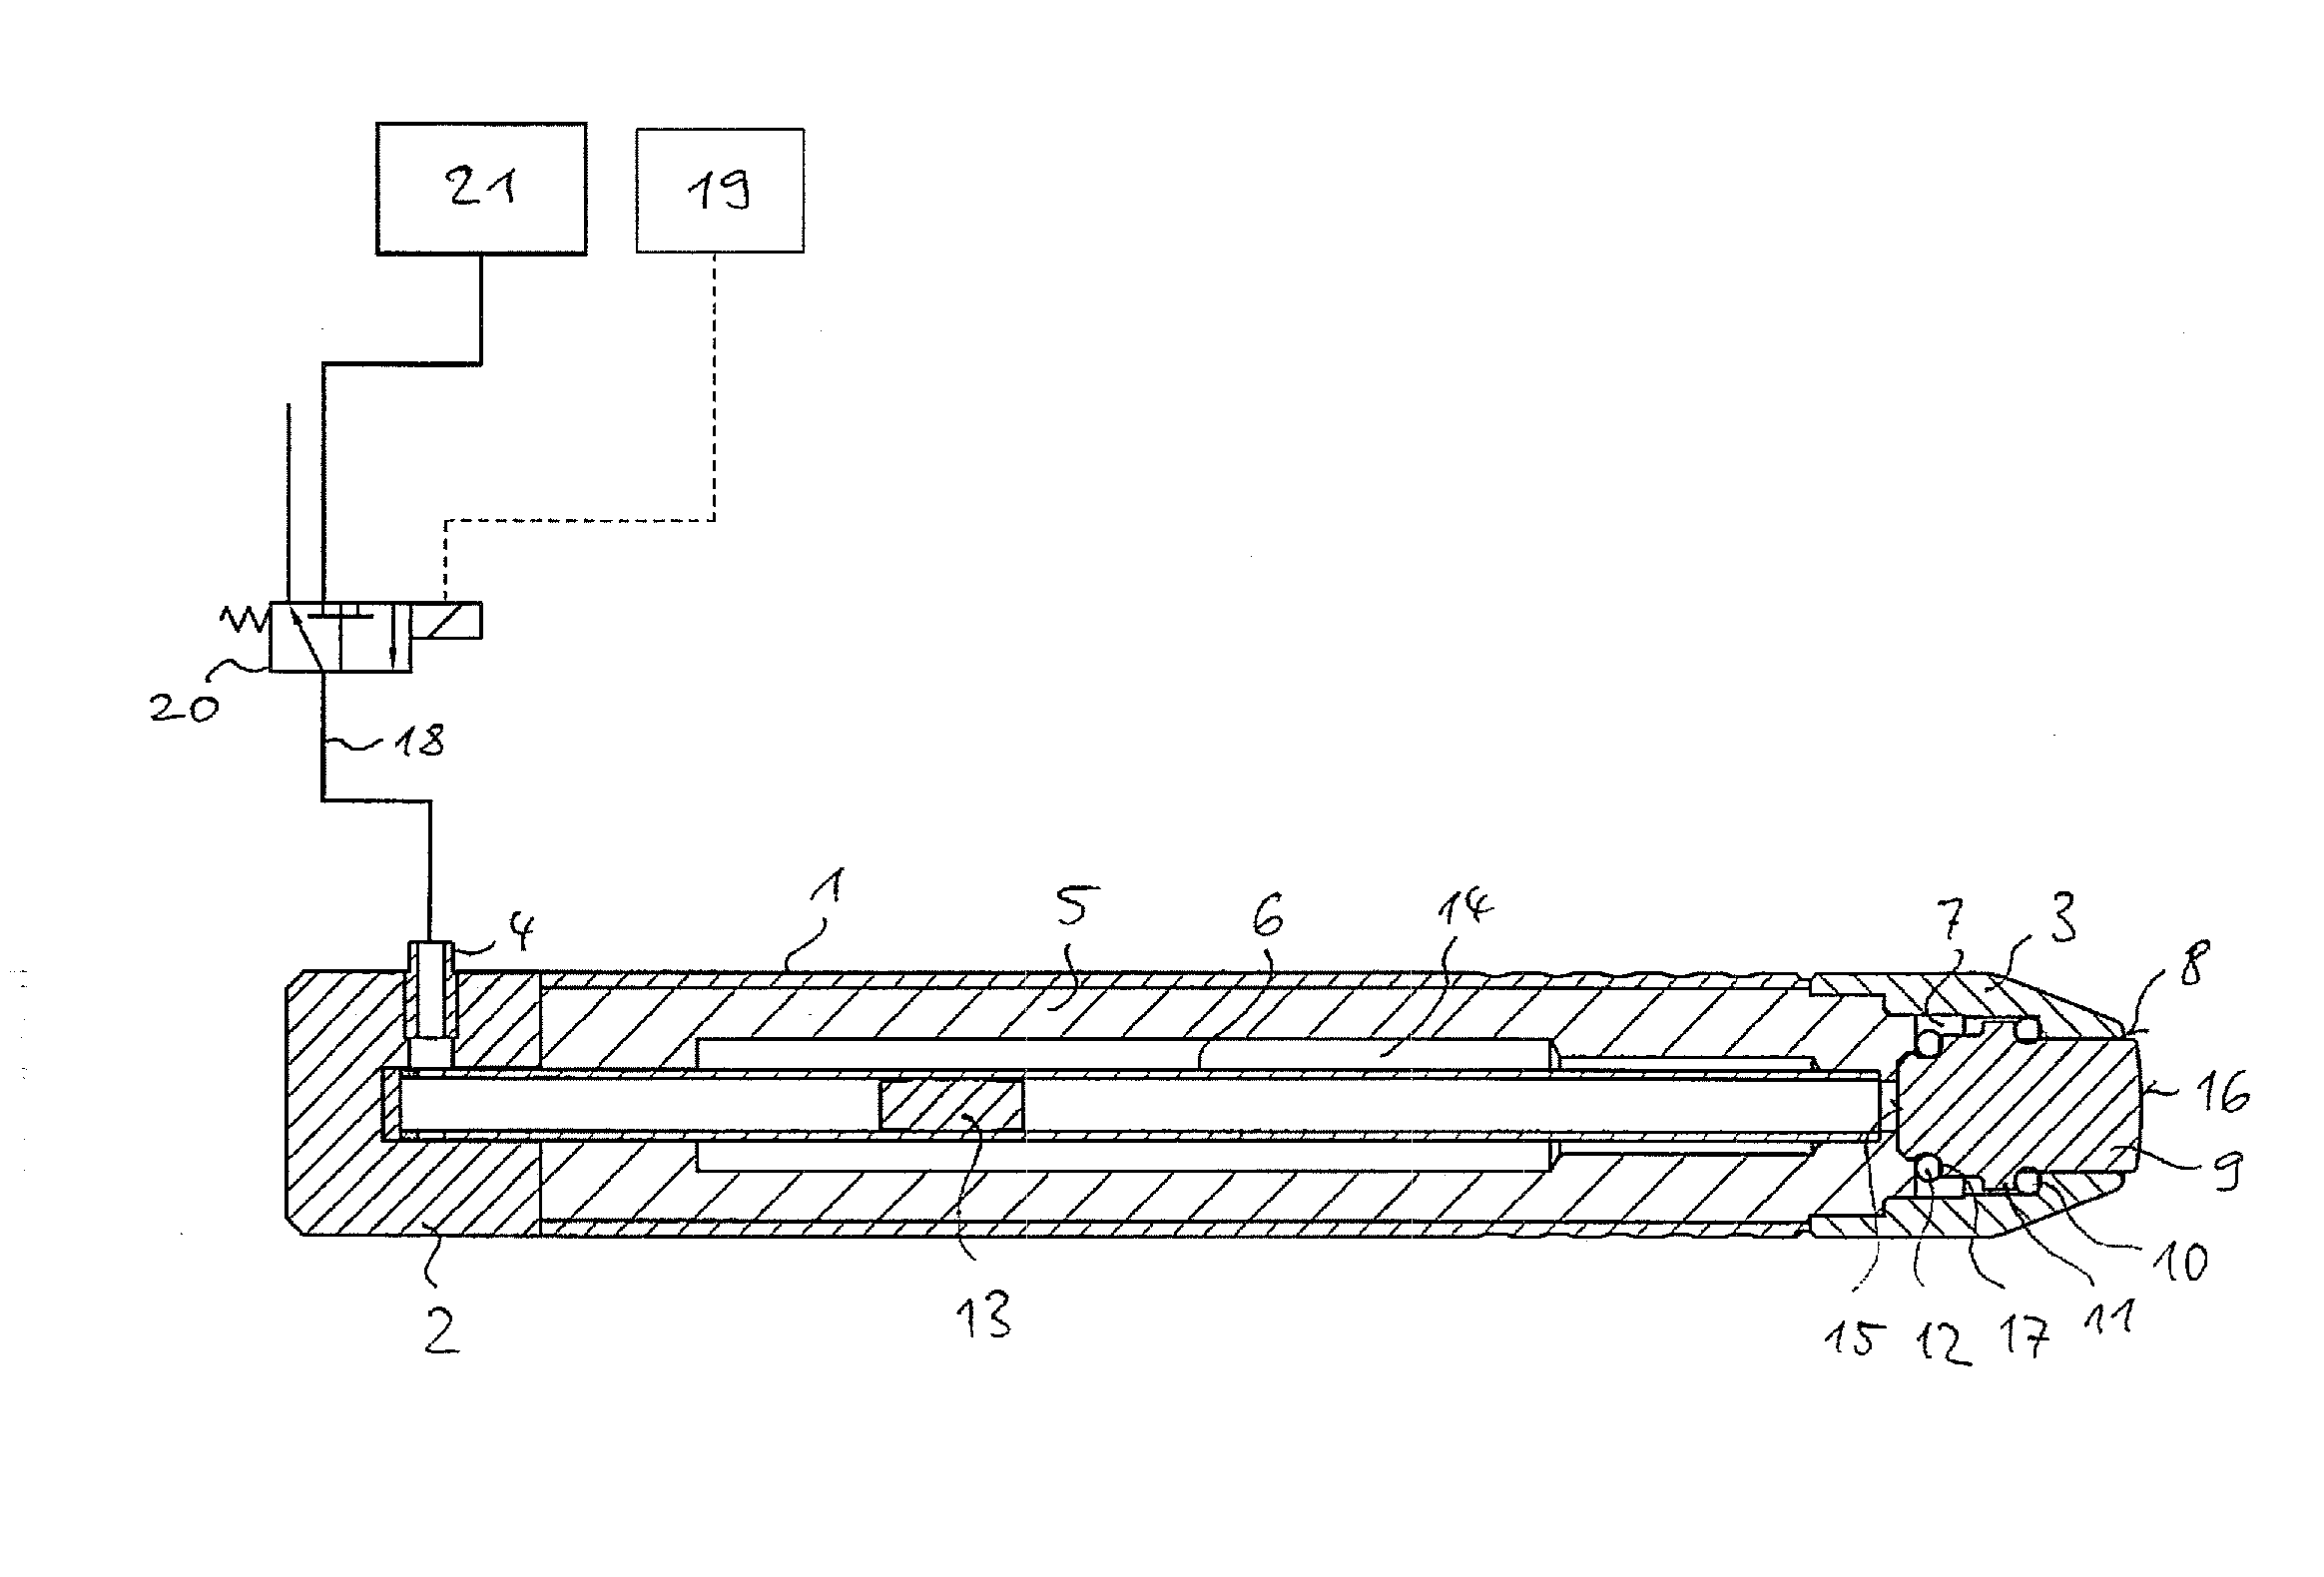 Apparatus for treating biological body substances by mechanical shockwaves